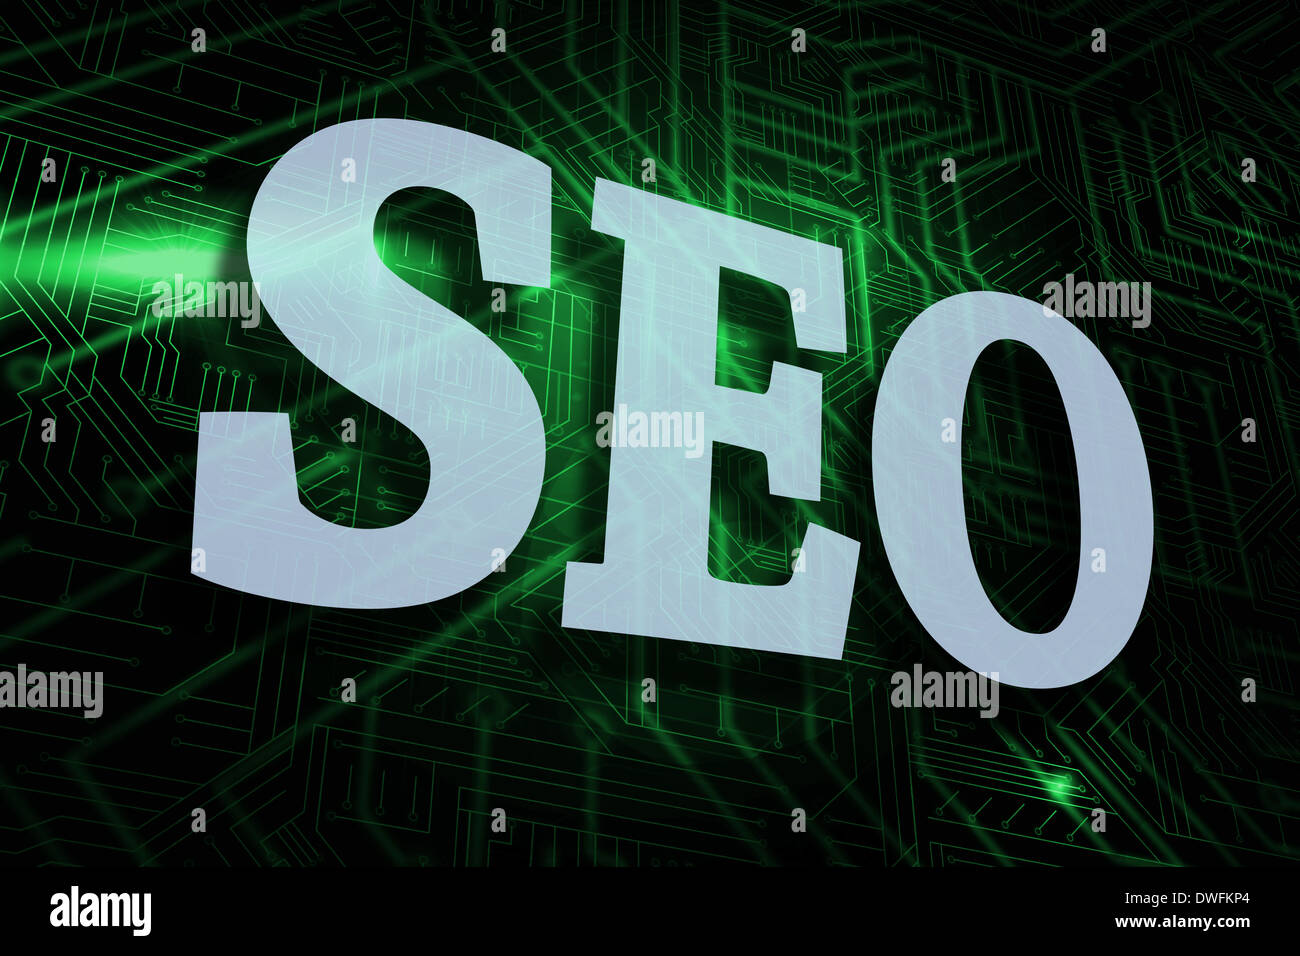 Seo against green and black circuit board Stock Photo